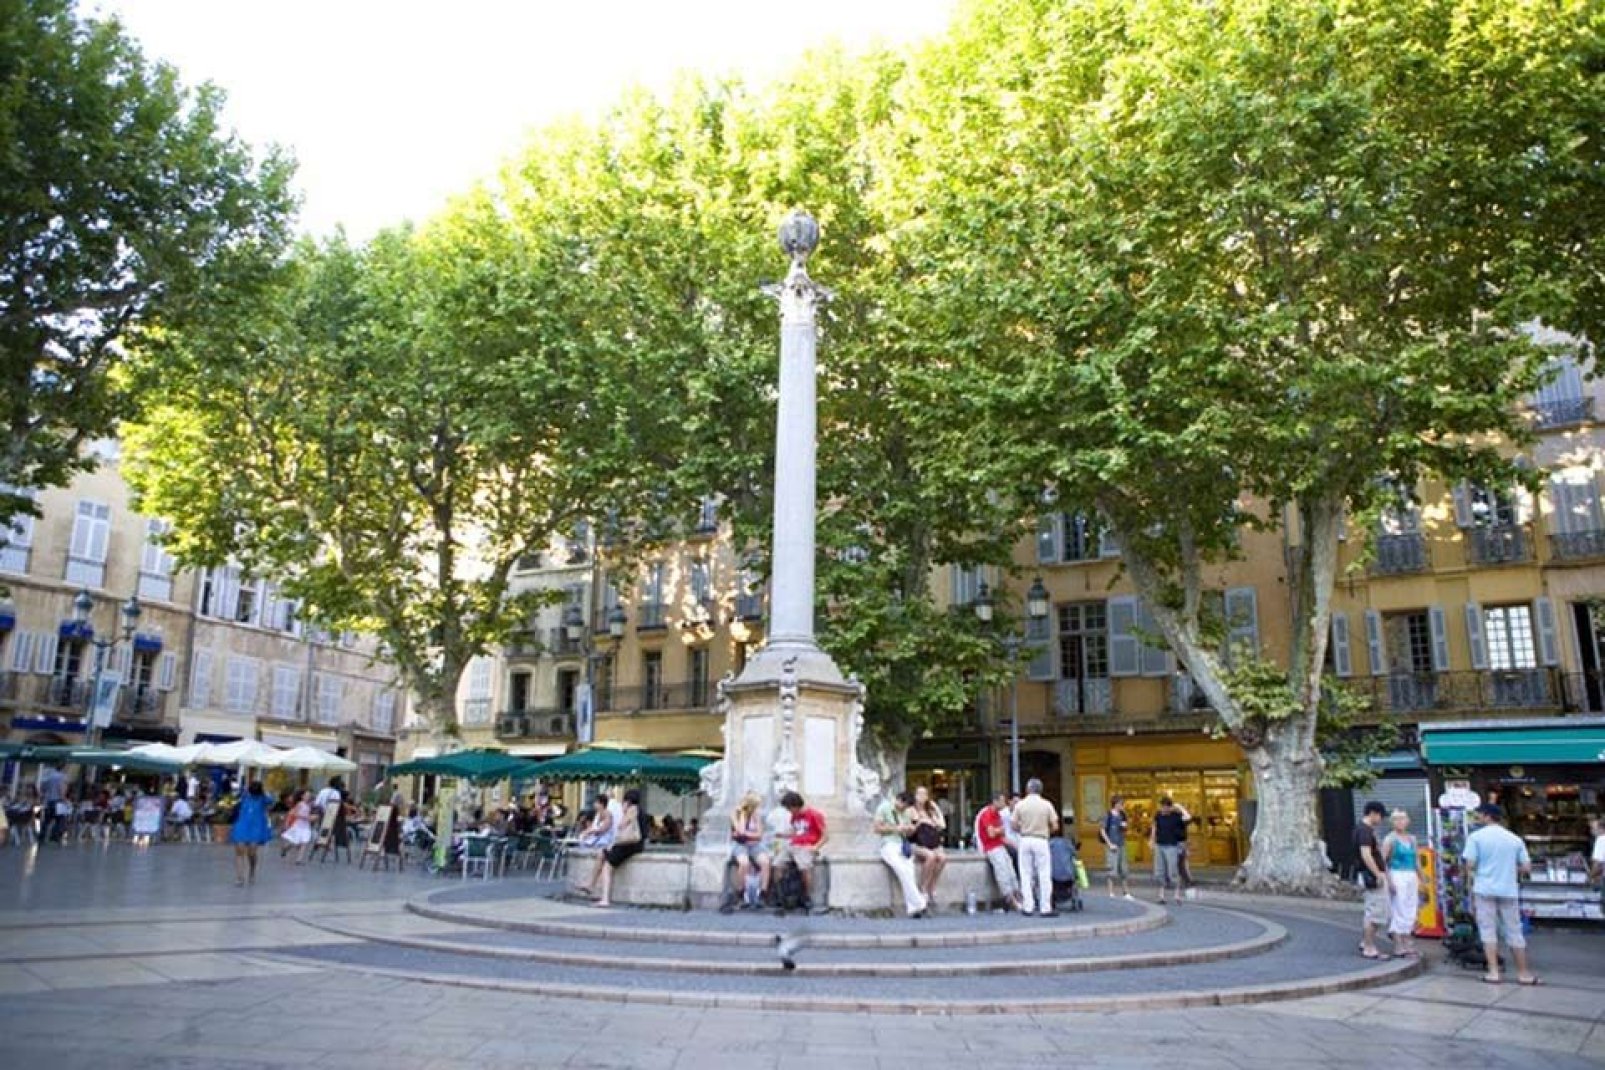 This fountain was built in 1756 and is easily recognisable thanks to the Roman column that sits above it. Needless to say, this is one of the most popular meeting places in Aix.